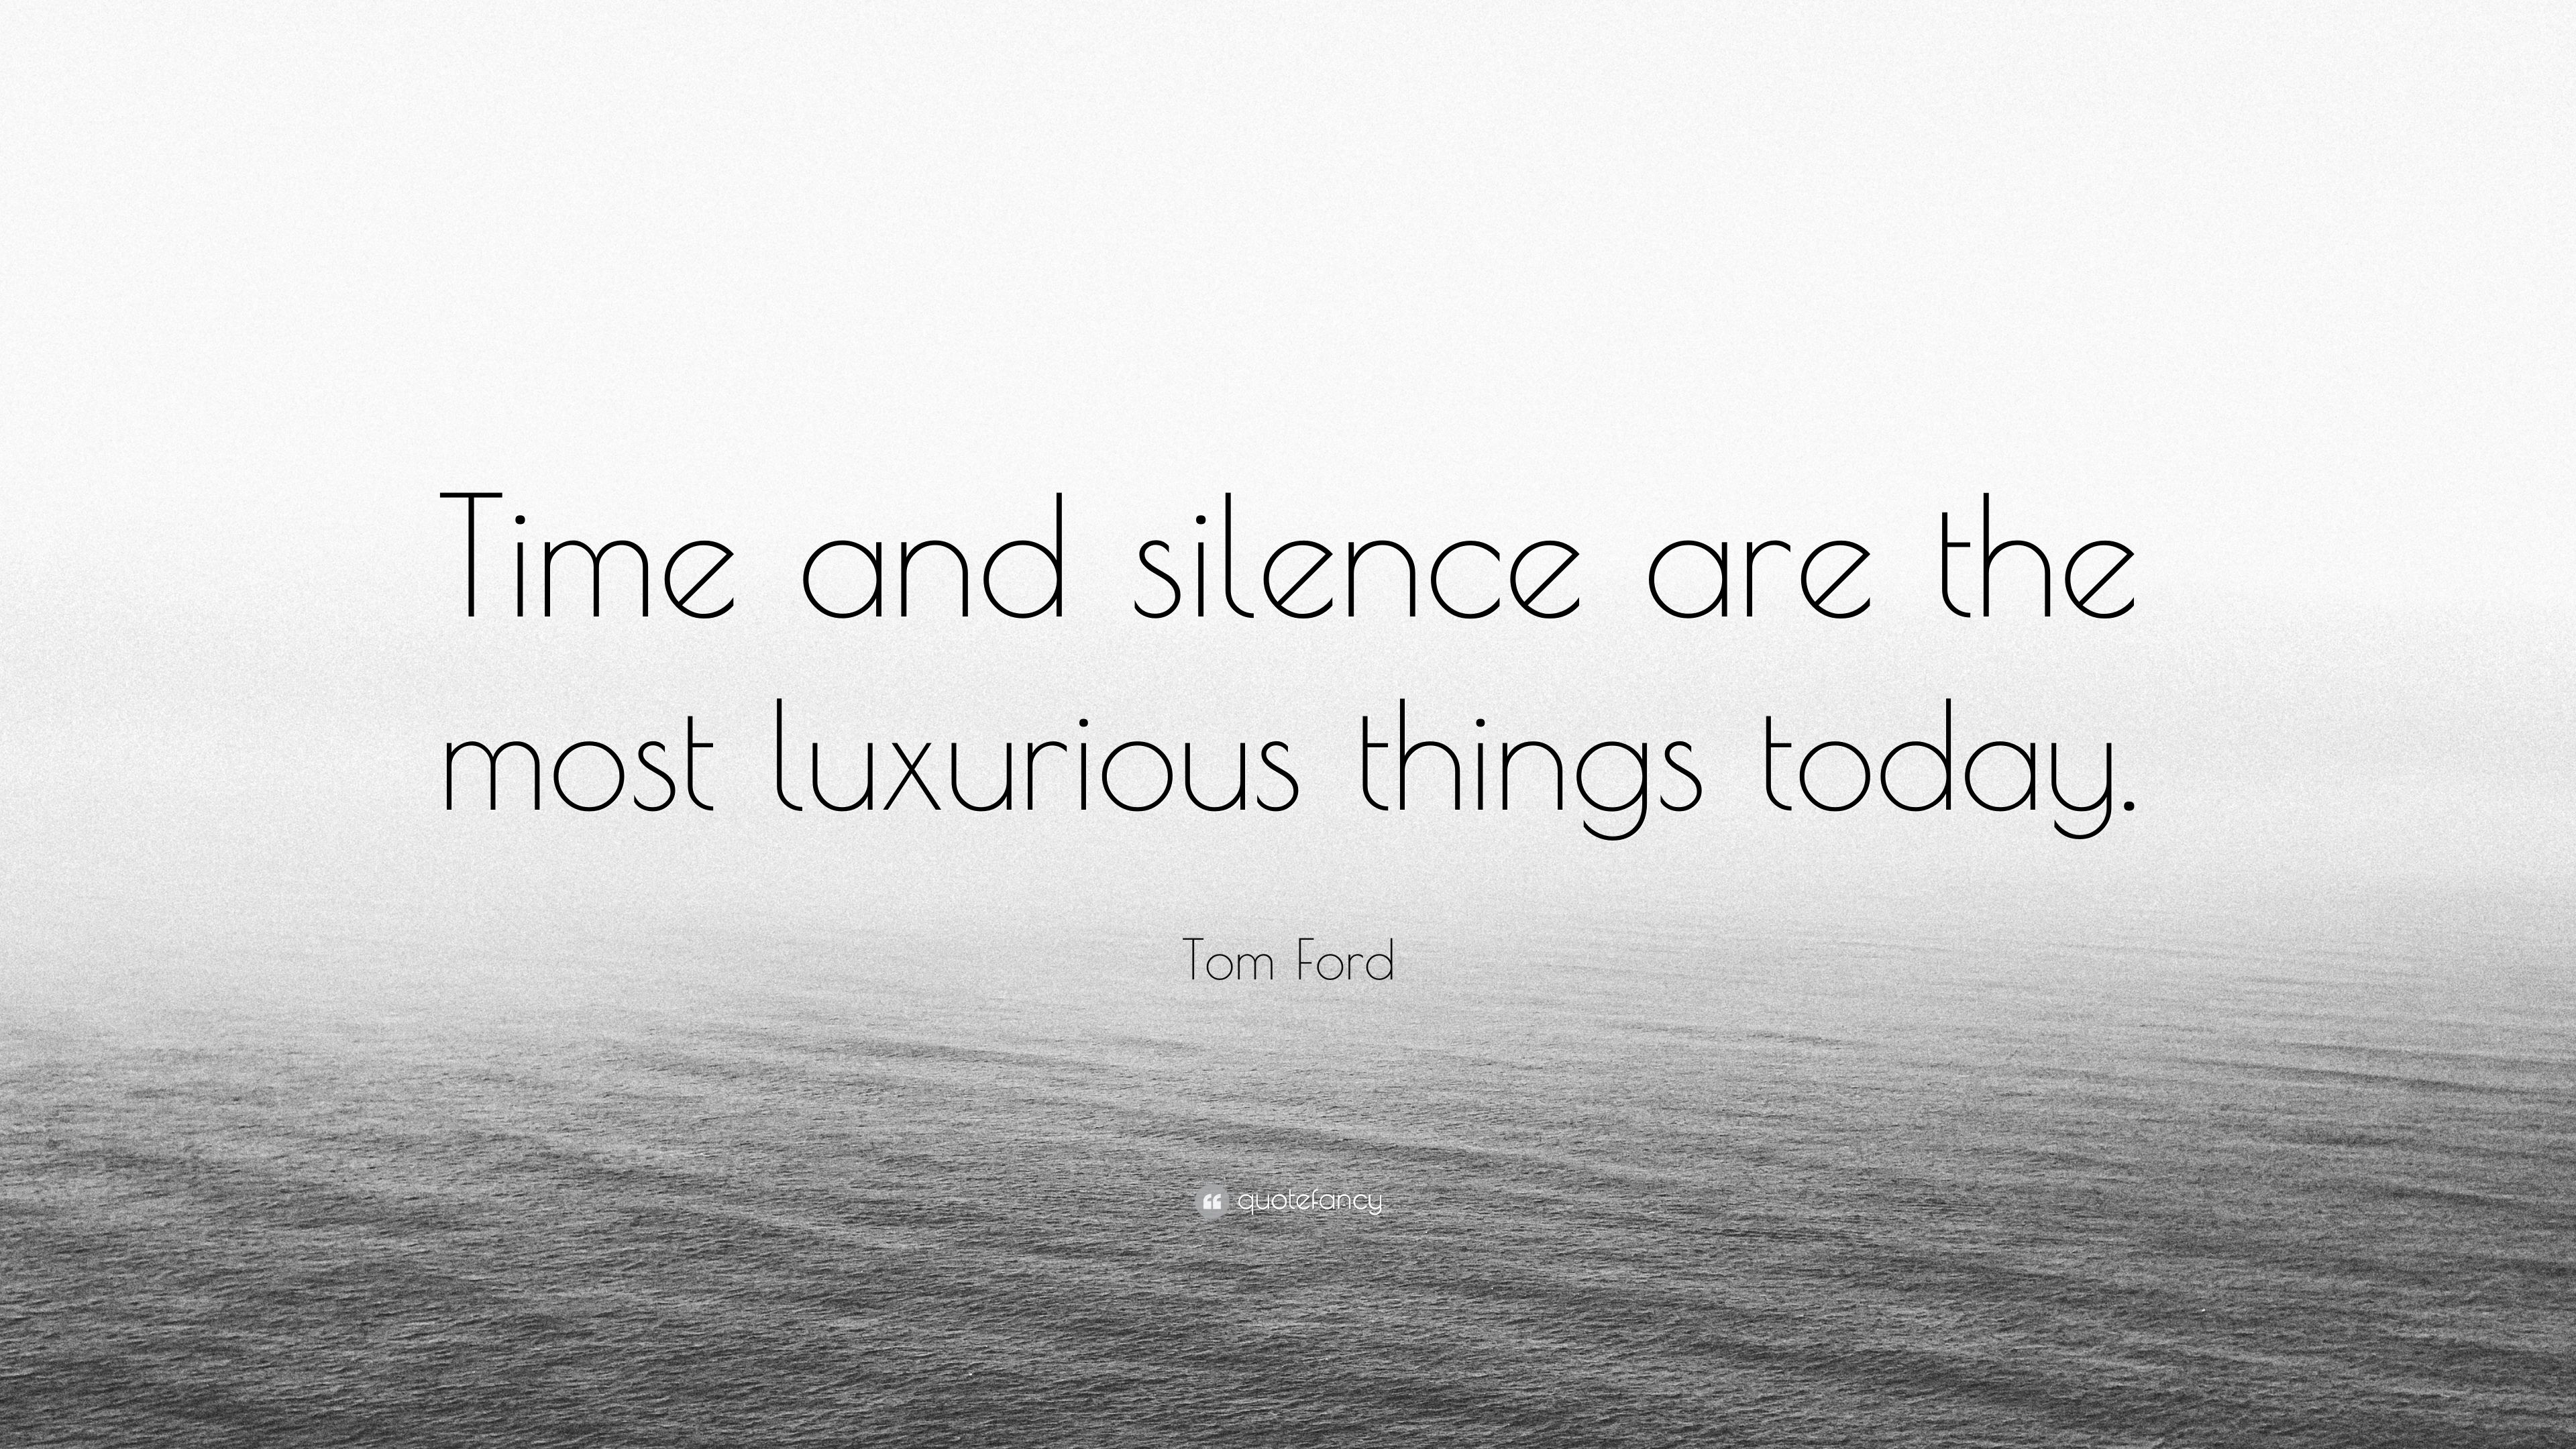 Tom Ford Quote: “Time and silence are the most luxurious things